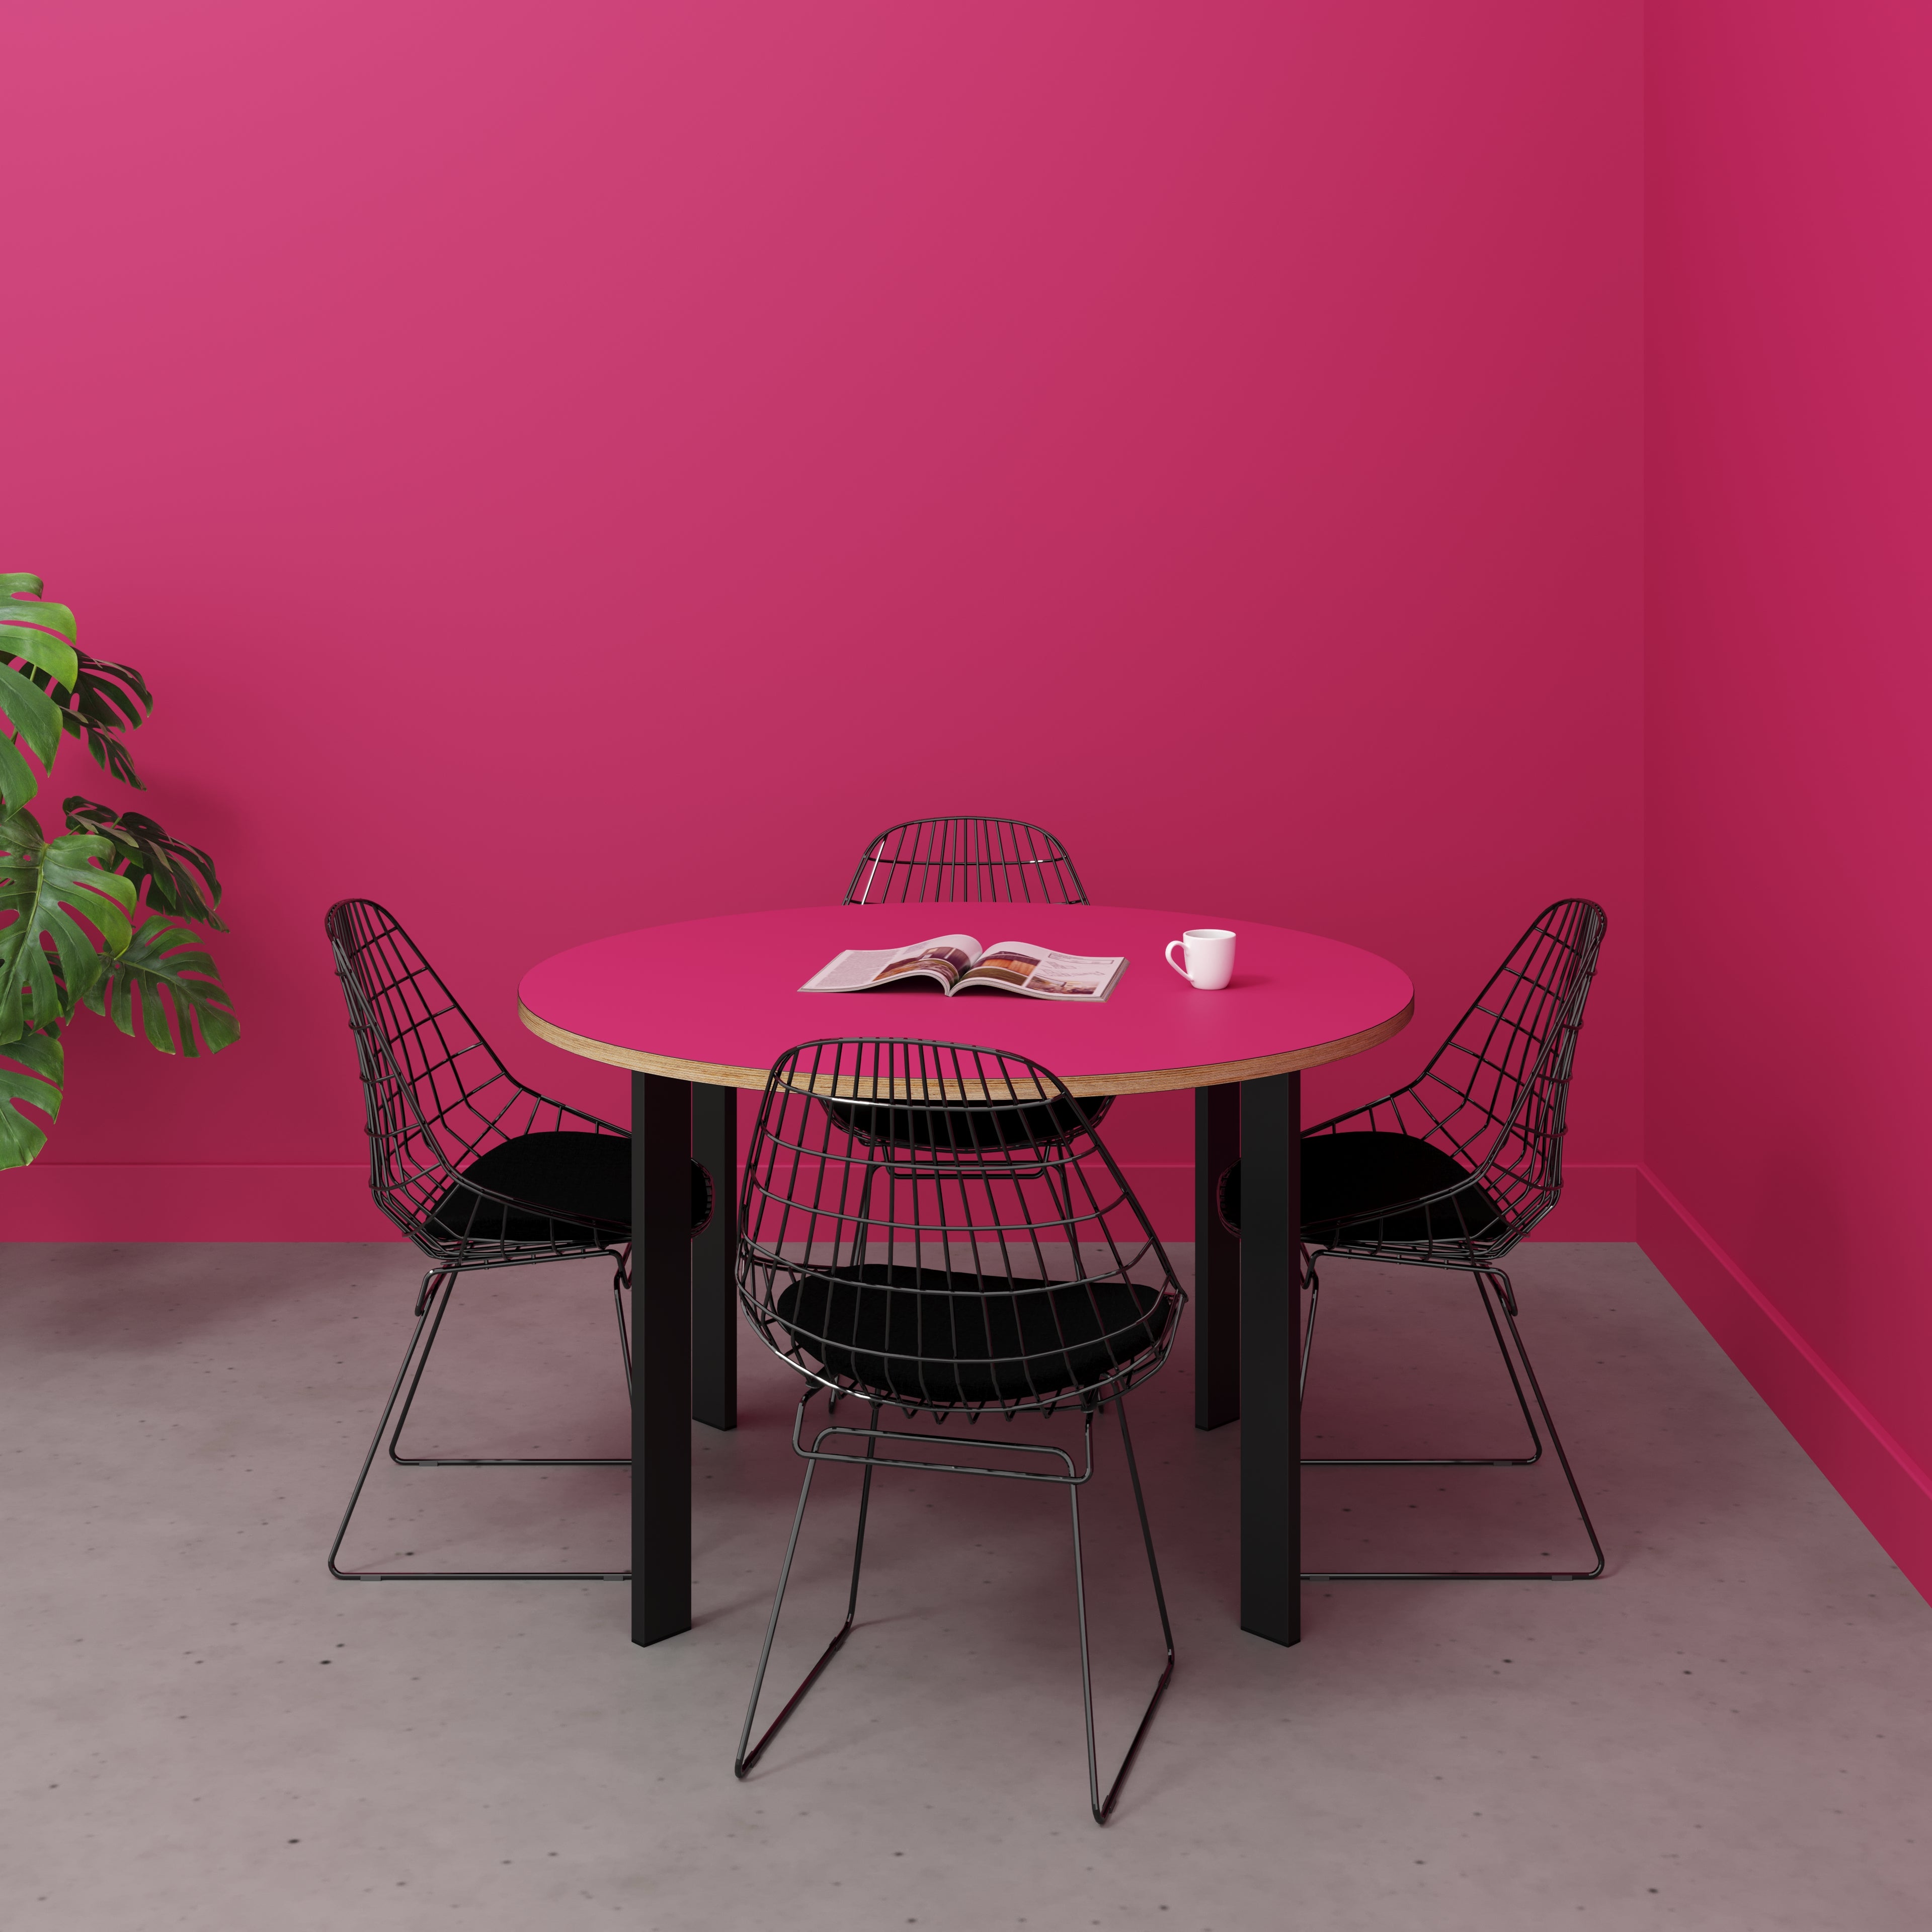 Round Table with Black Rectangular Single Pin Legs - Formica Juicy Pink - 1200(dia) x 750(h)